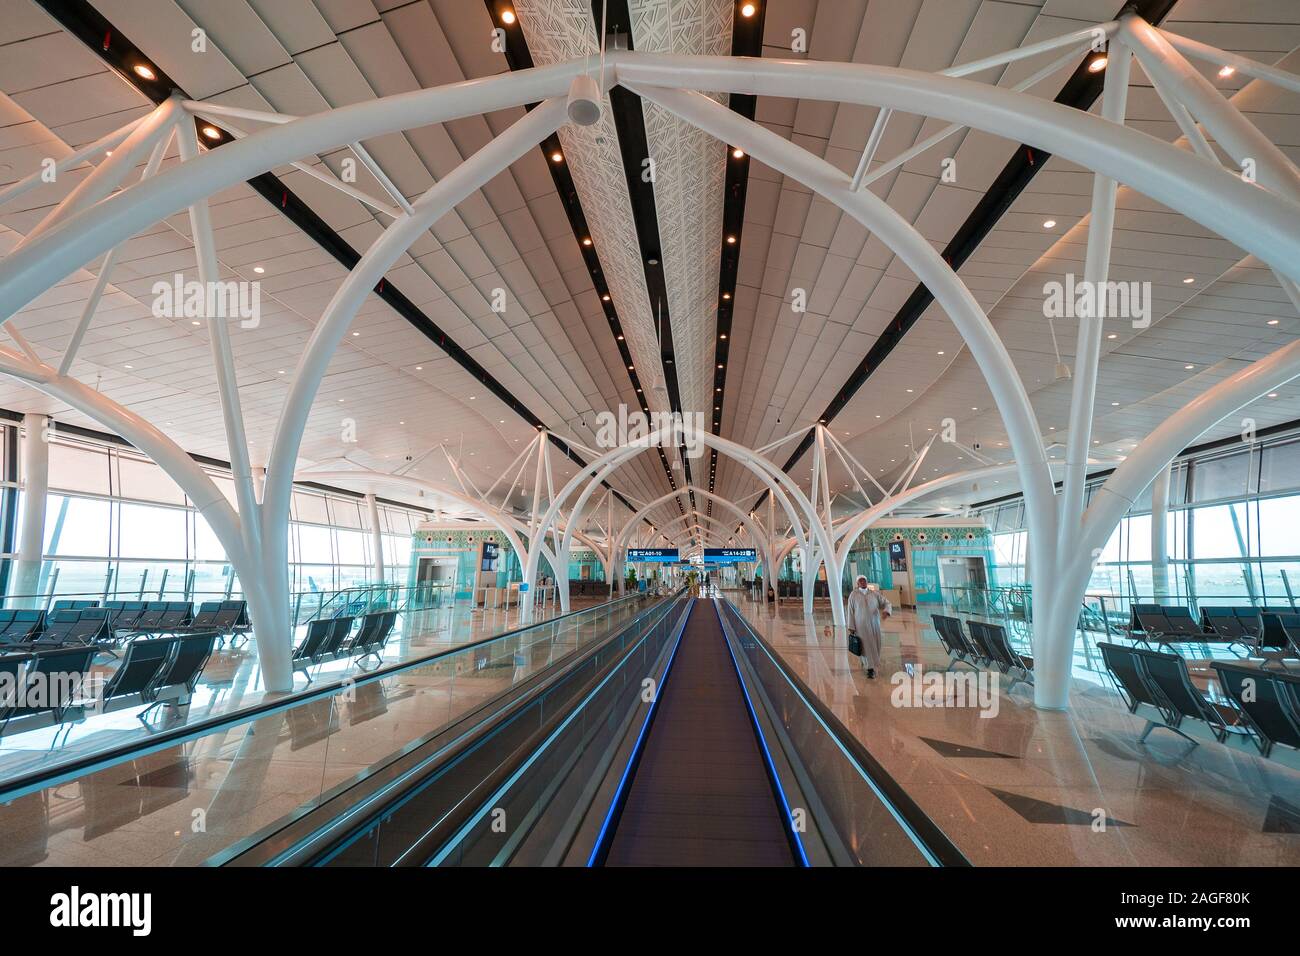 Interior view of the brand new Terminal 1 at the King Abdulaziz International Airport (JED) in Jeddah, Saudi Arabia, during a test run in 2019 Stock Photo